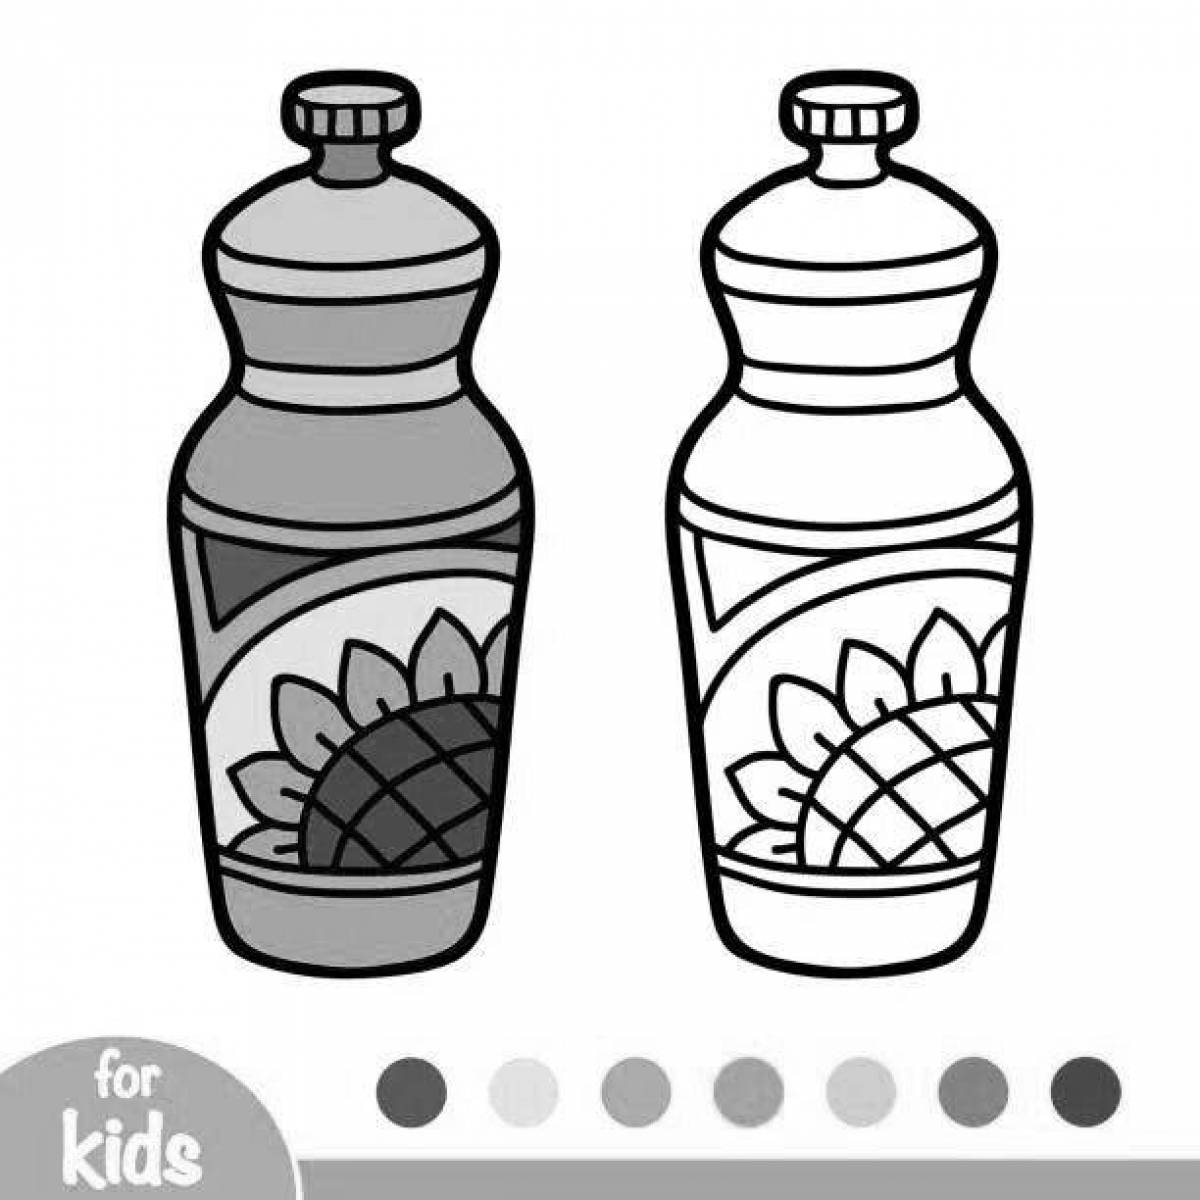 Coloring page with bright oil